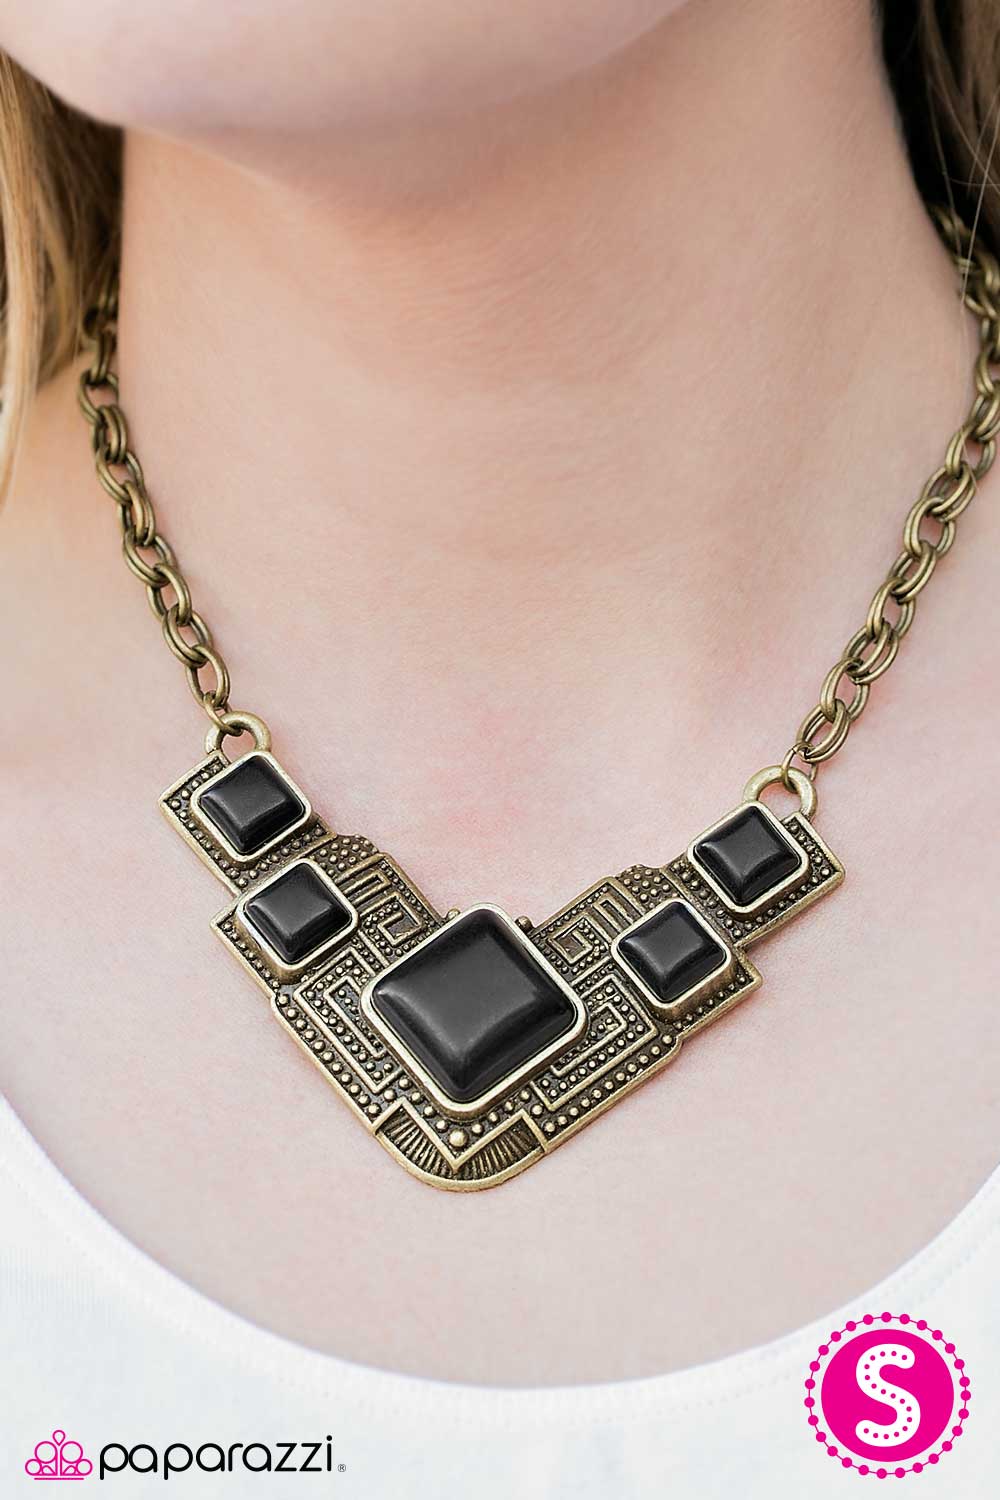 Way To Make An EMPRESS-ion! - Brass - Paparazzi necklace